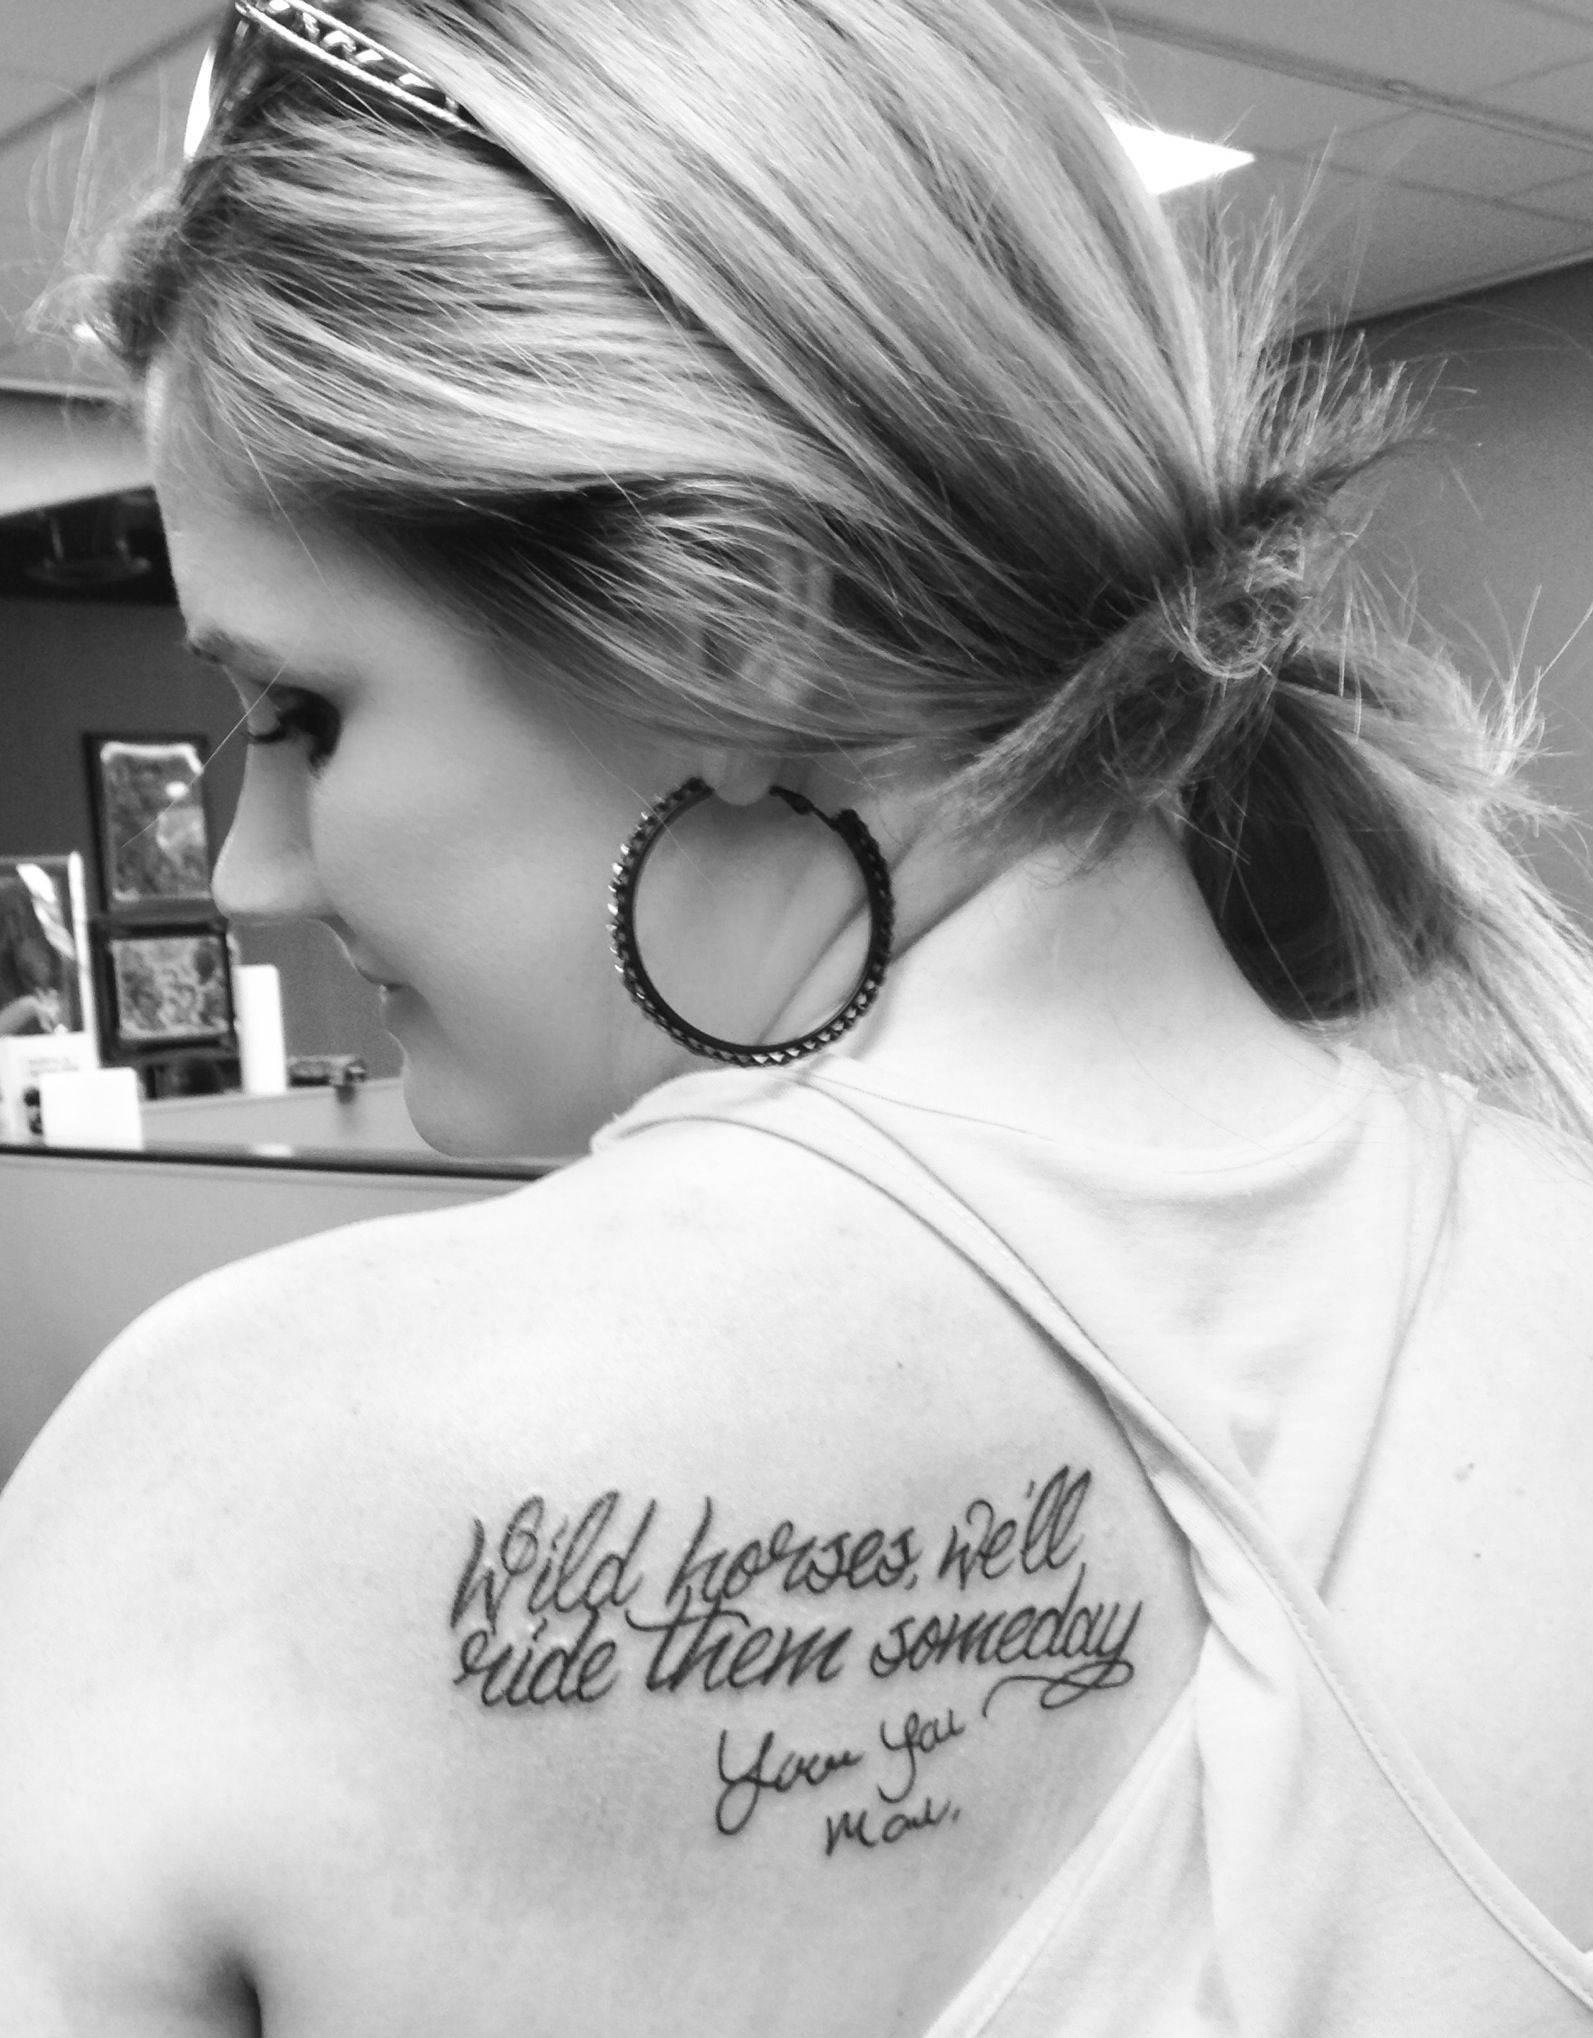 Tattoo For My Momour Favorite Song Lyrics And Her Signature regarding dimensions 1593 X 2038